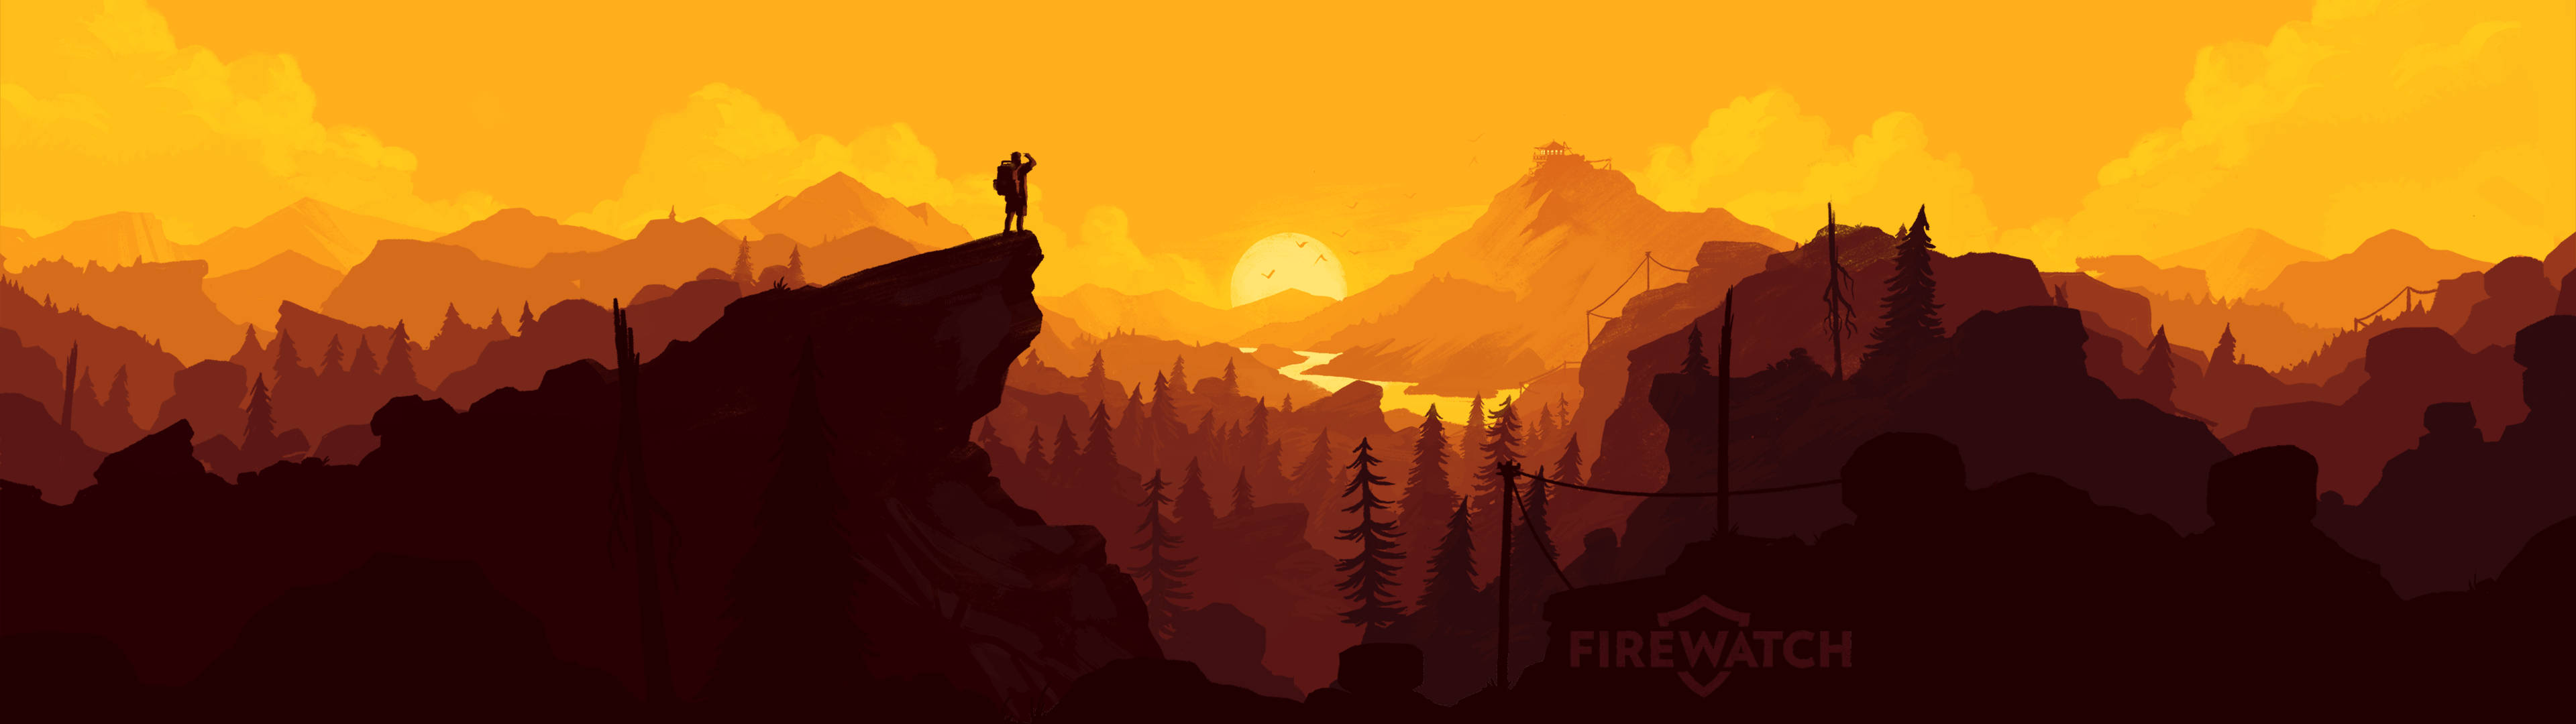 Firewatch Dual Monitor Picture